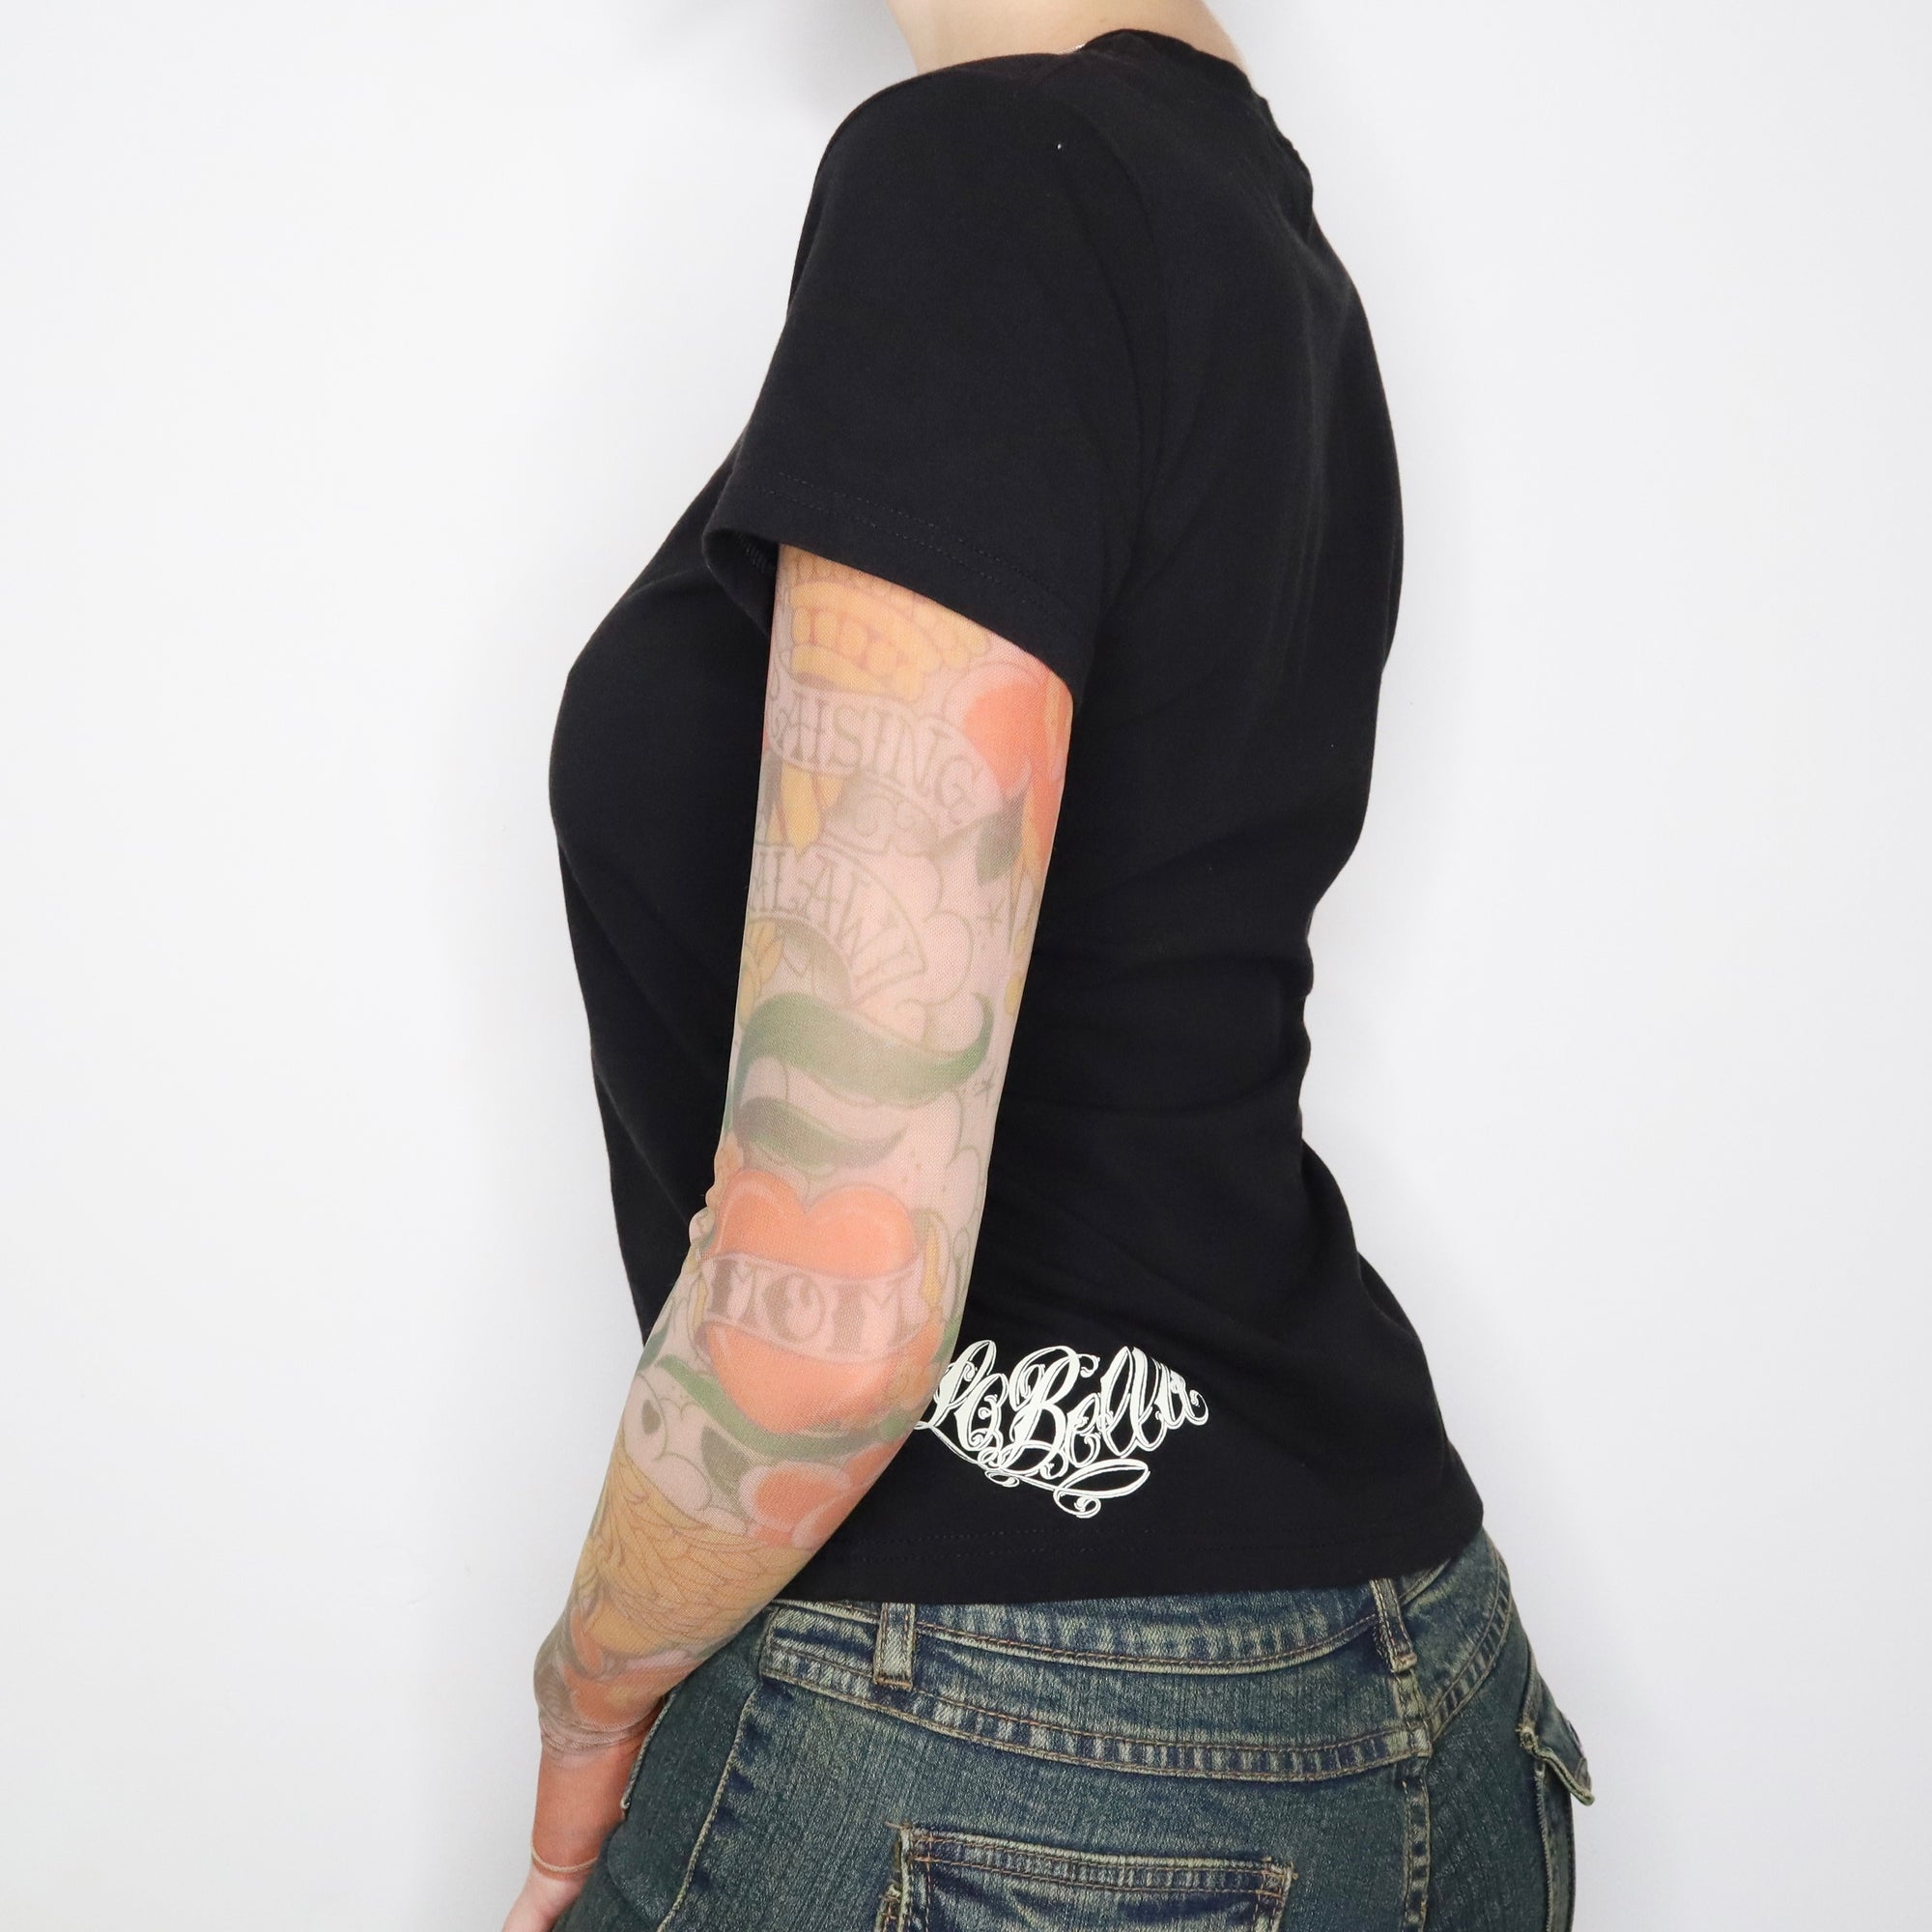 Vintage Early 2000s Black Tee with Tattoo Mesh Long Sleeves